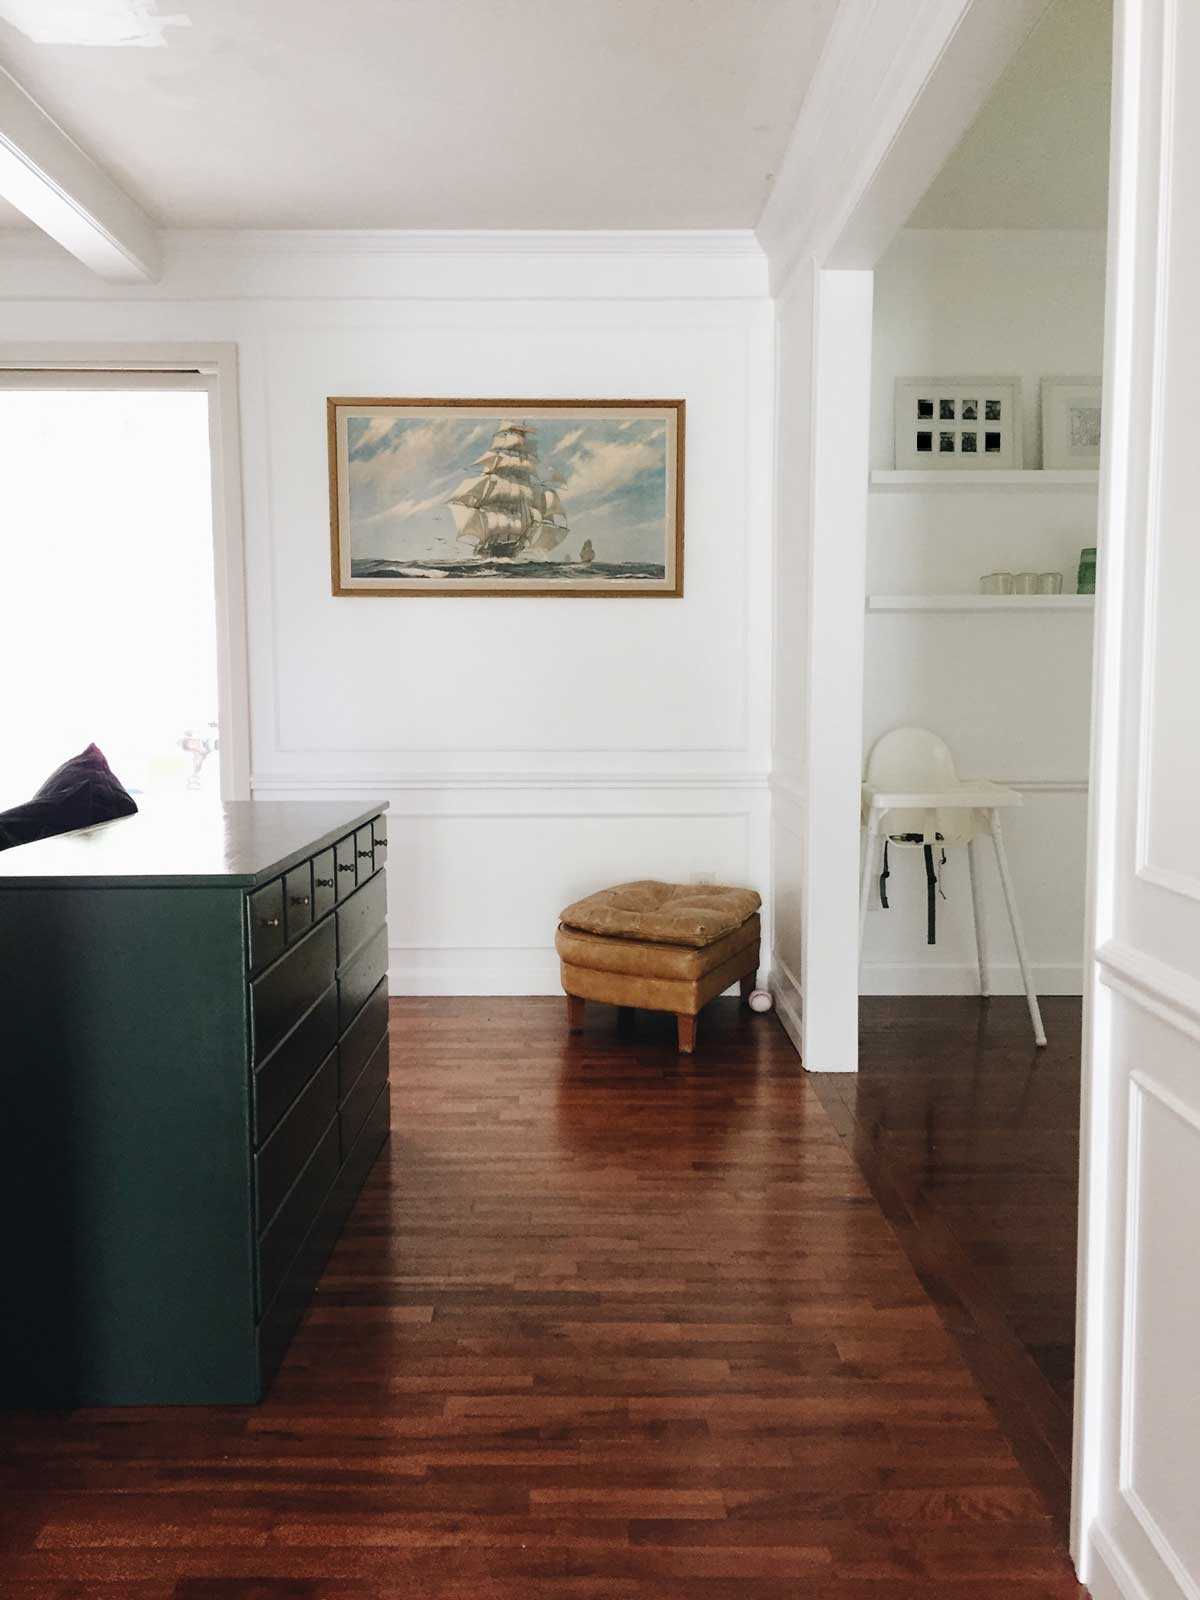 Rachel Schultz: WHY I PAINTED OUR WOOD TRIM